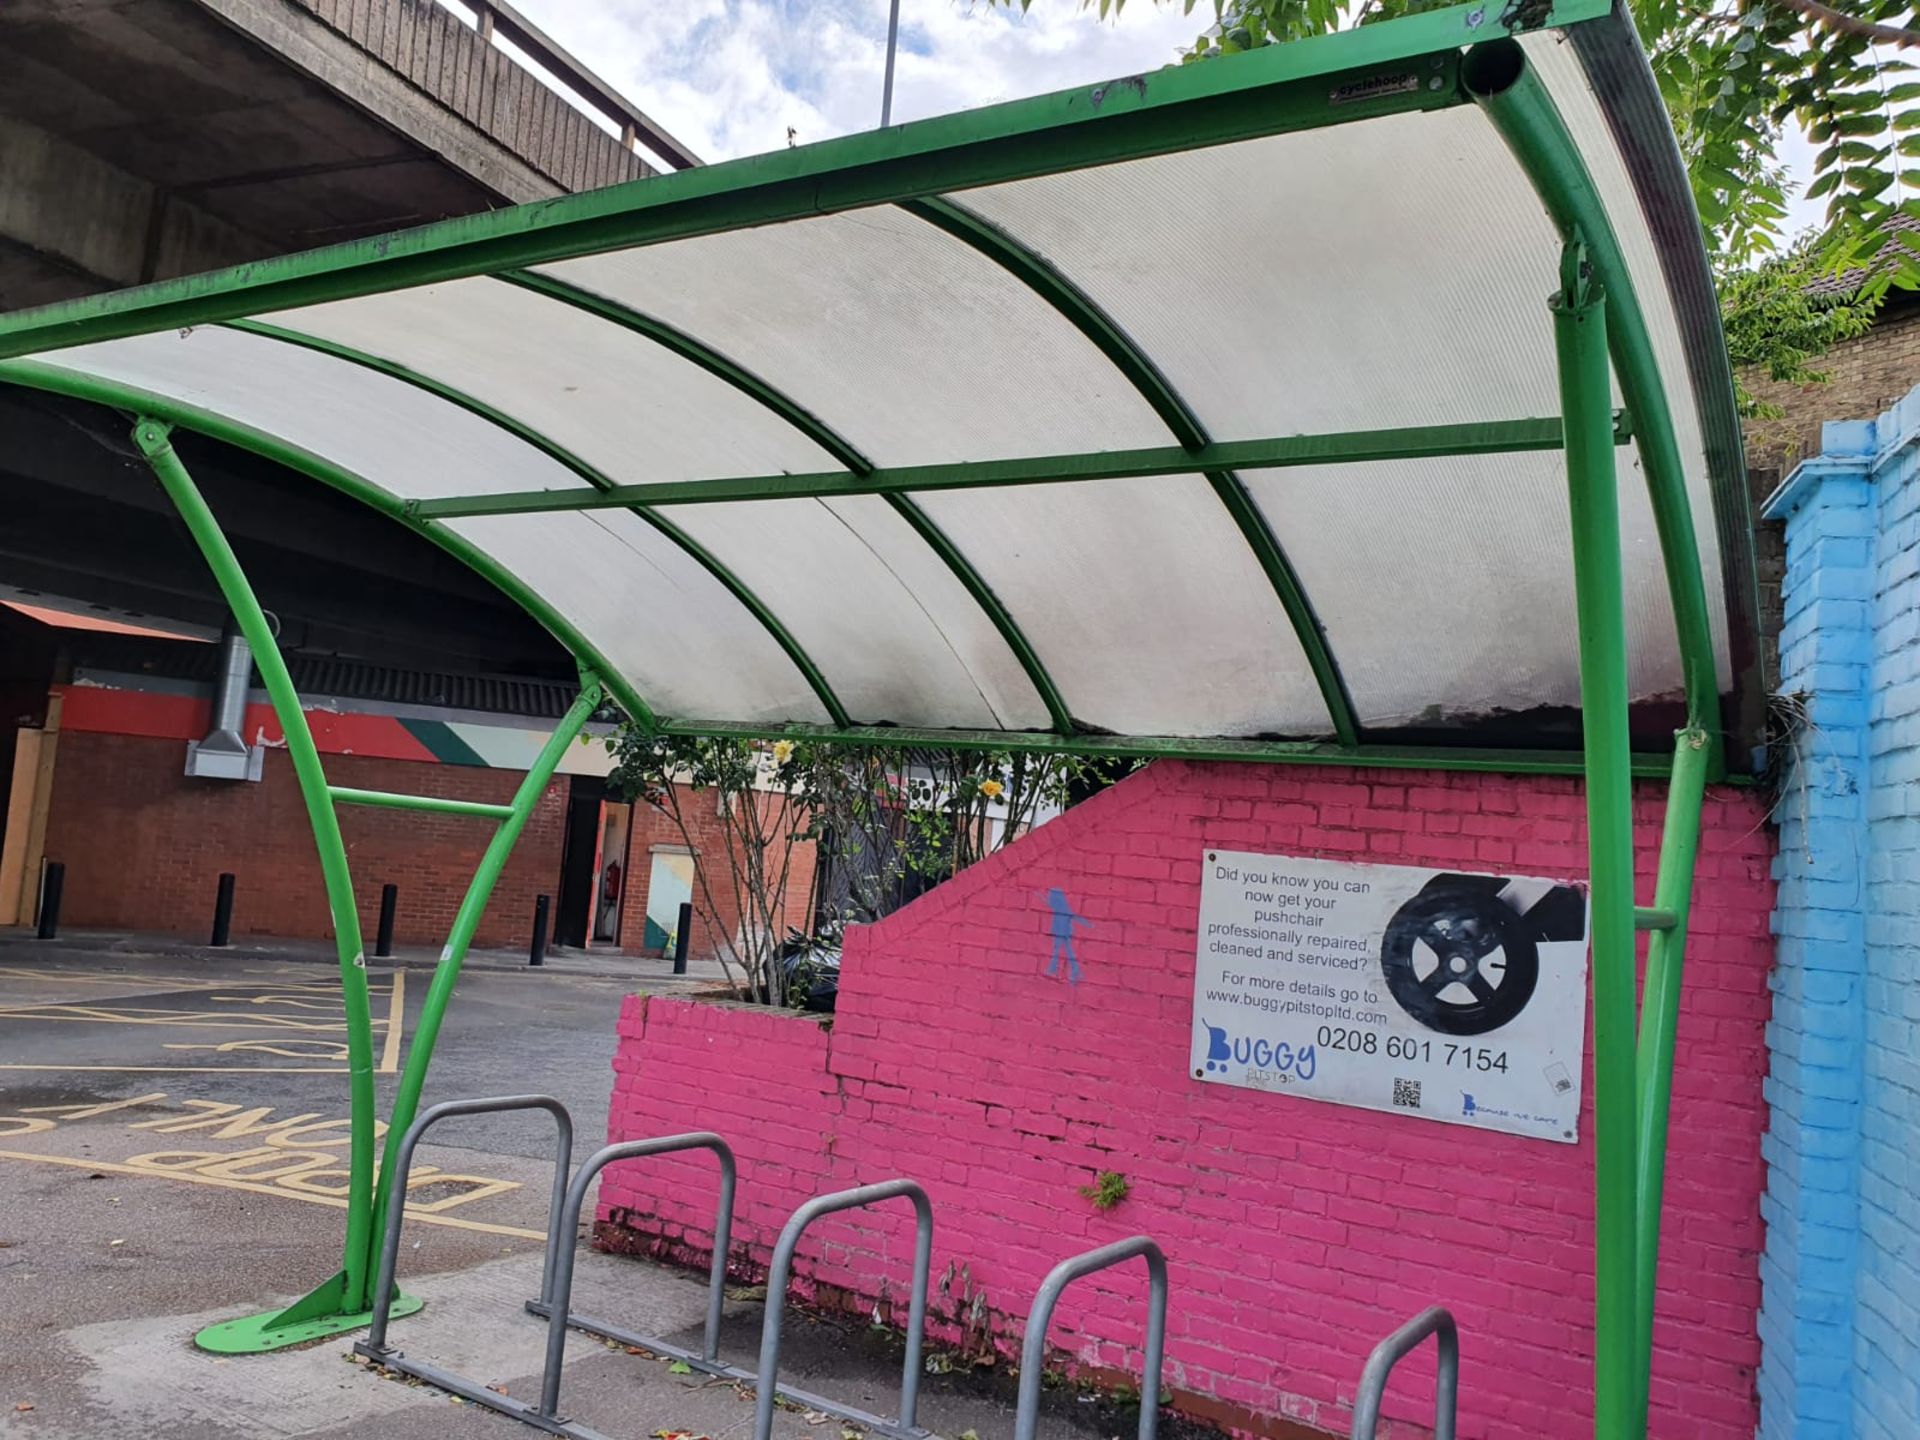 1 x Bike Shelter With Bike Racks - Suitable For Upto 8 Bikes - Contemporary Design - Suitable For - Image 9 of 9